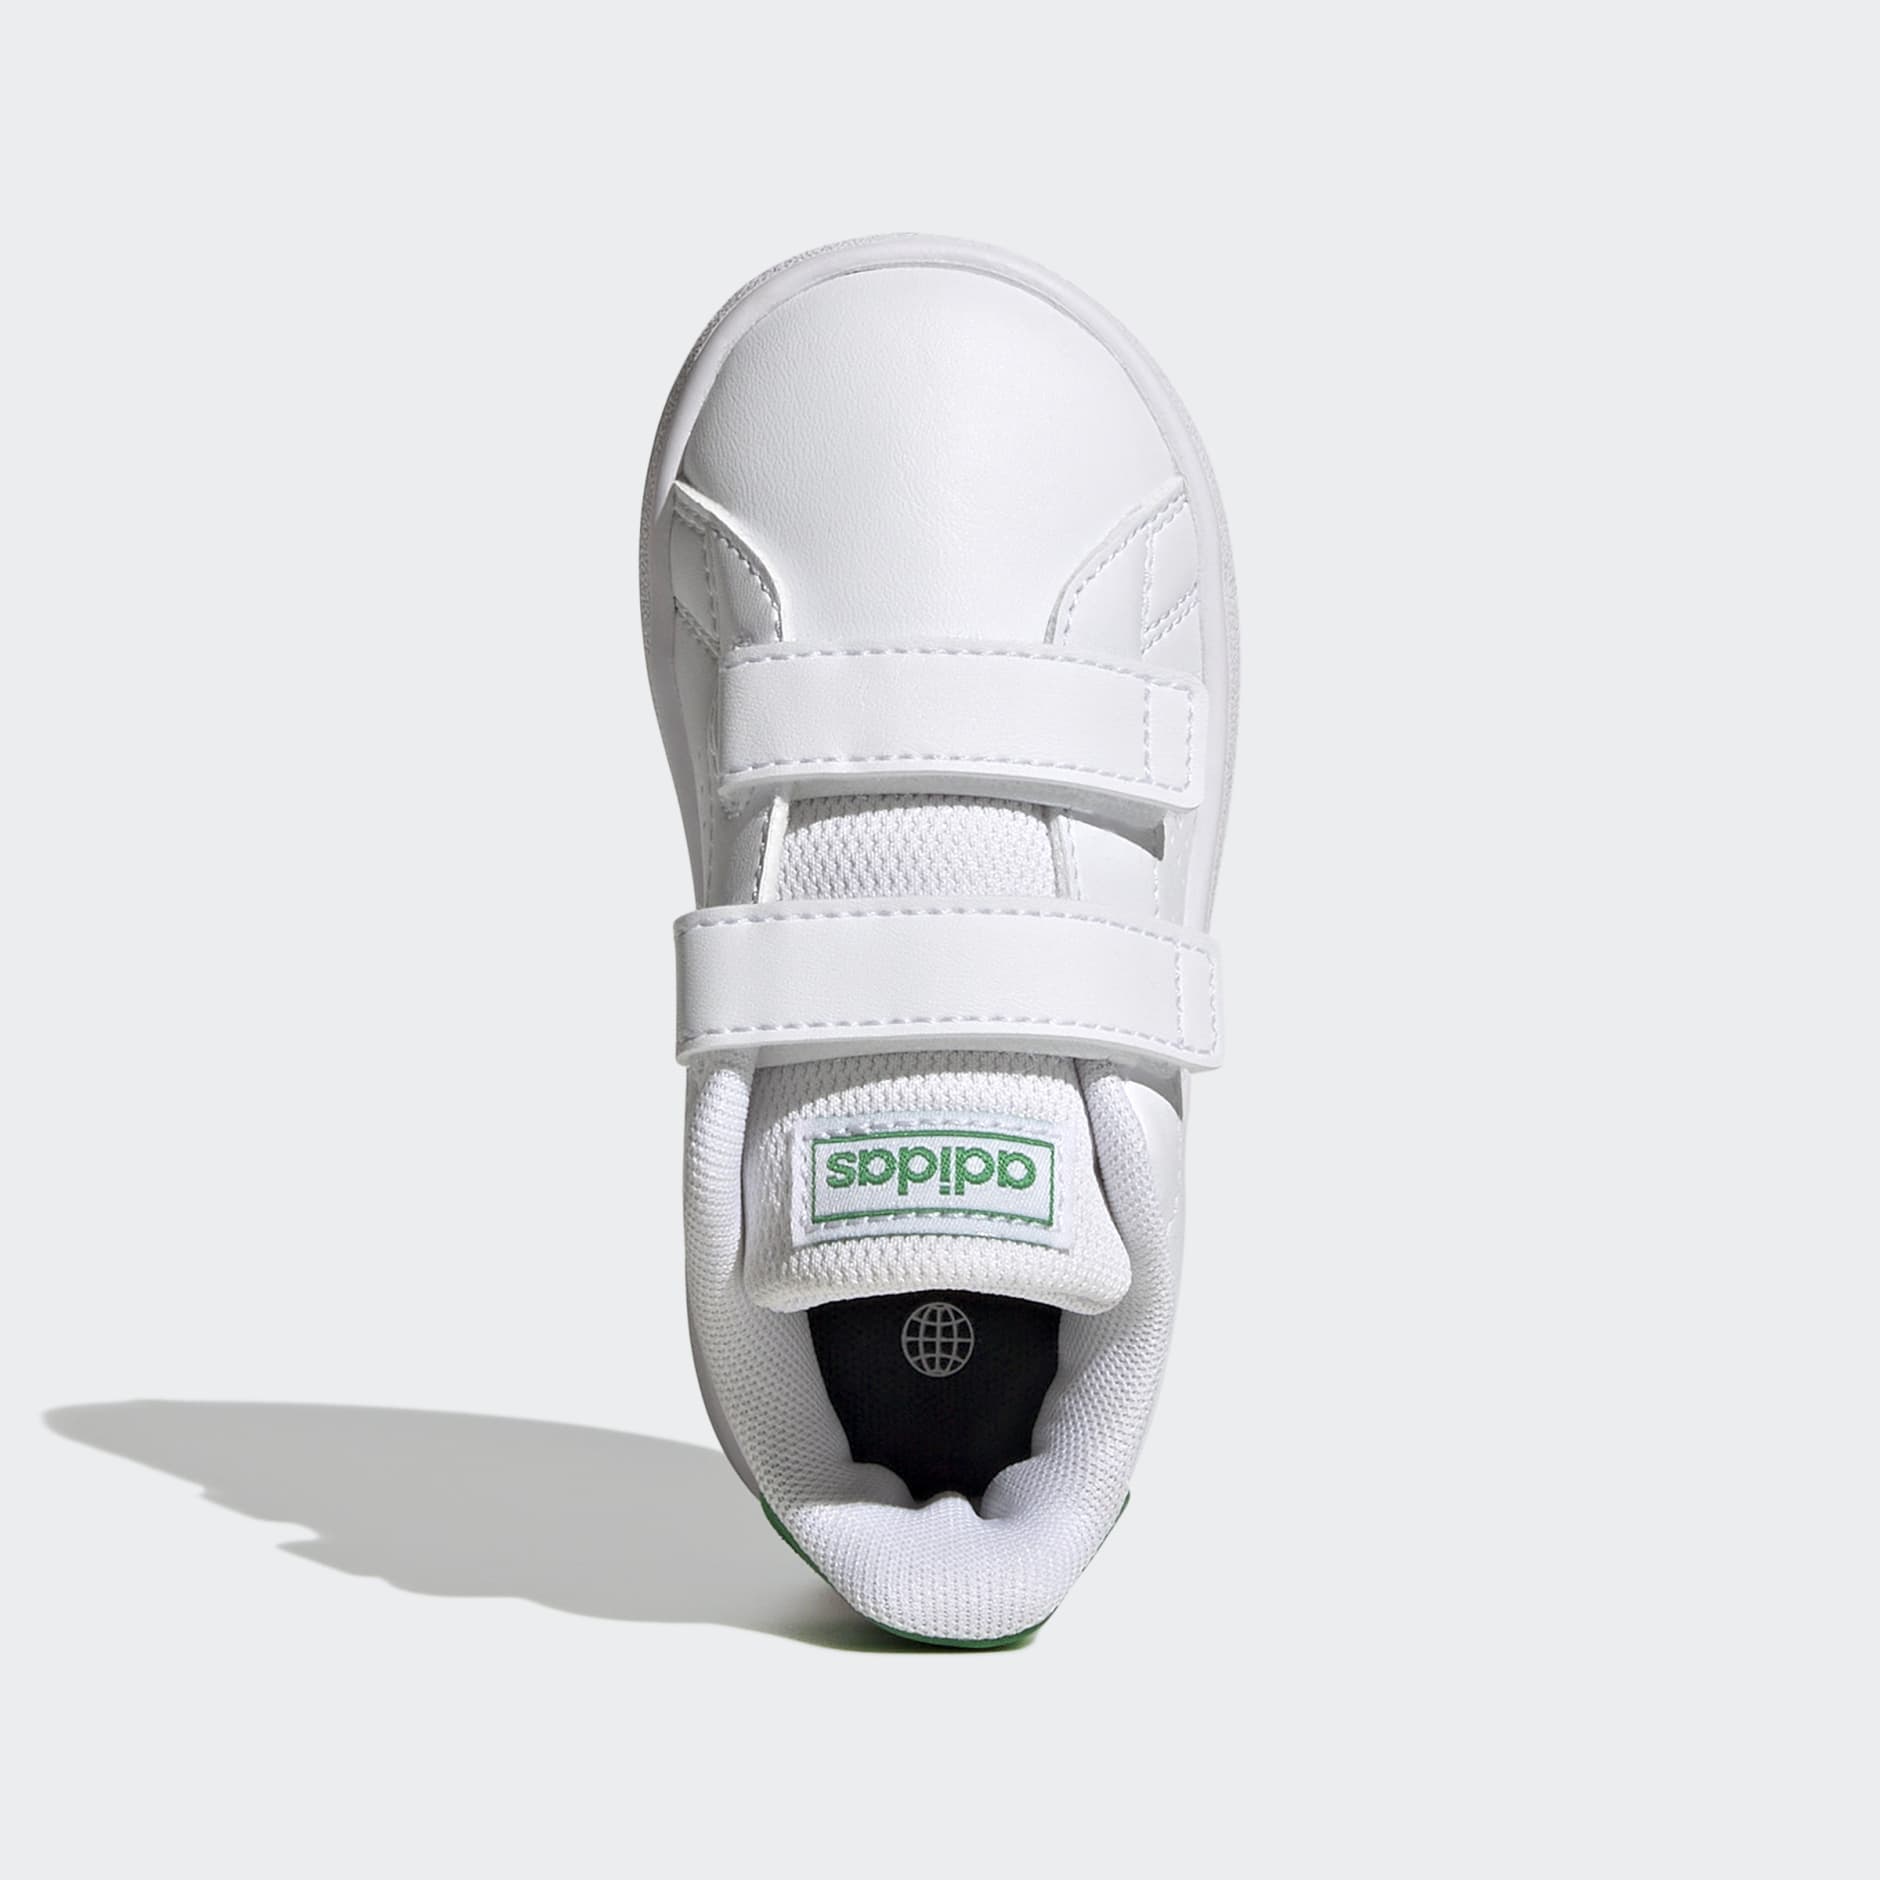 adidas Advantage Lifestyle Court Two Hook-and-Loop Shoes - White | adidas LK | Sneaker low